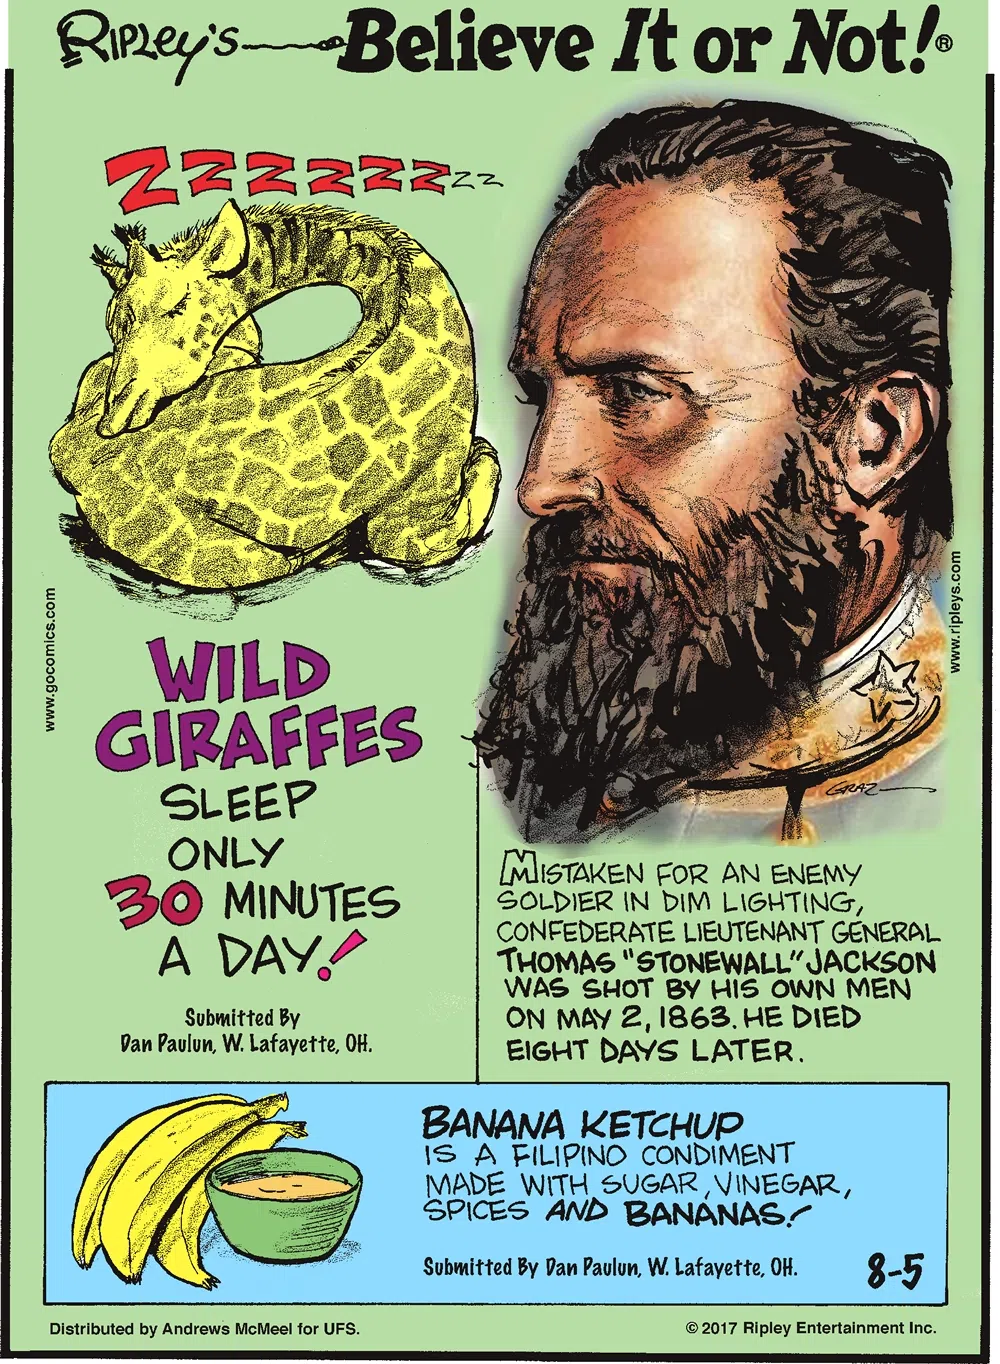 Wild giraffes sleep only 30 minutes a day! Submitted by Dan Paulun, W. Lafayette, OH.-------------------- Mistaken for an enemy soldier in dim lighting, Confederate Lieutenant General Thomas "Stonewall" Jackson was shot by his own men on May 2, 1863. He died eight days later.-------------------- Banana ketchup is a Filipino condiment made with sugar, vinegar, spices and bananas! Submitted by Dan Paulun, W. Lafayette, OH.